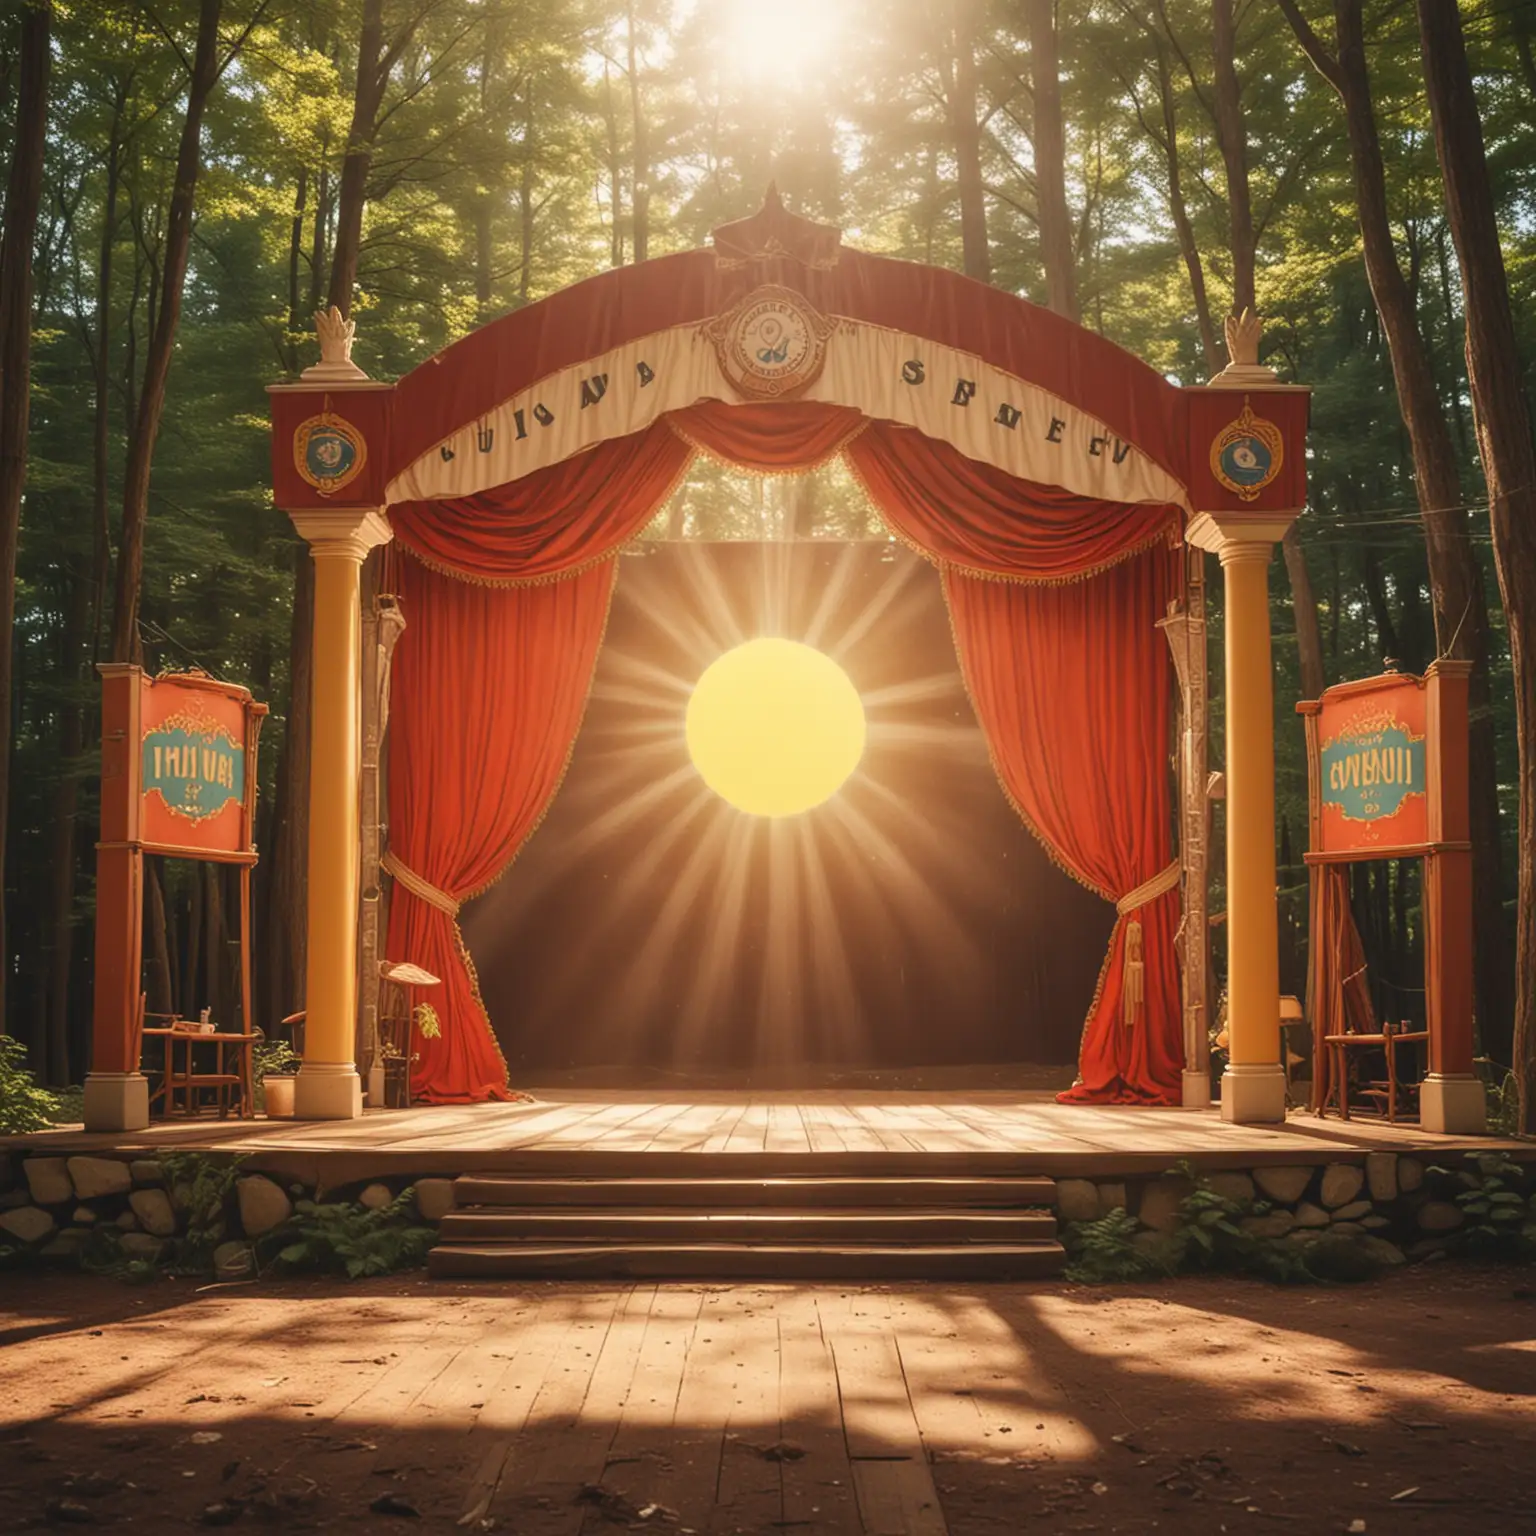 Summer Camp Theater Stage with Sunlight Wes Anderson Style